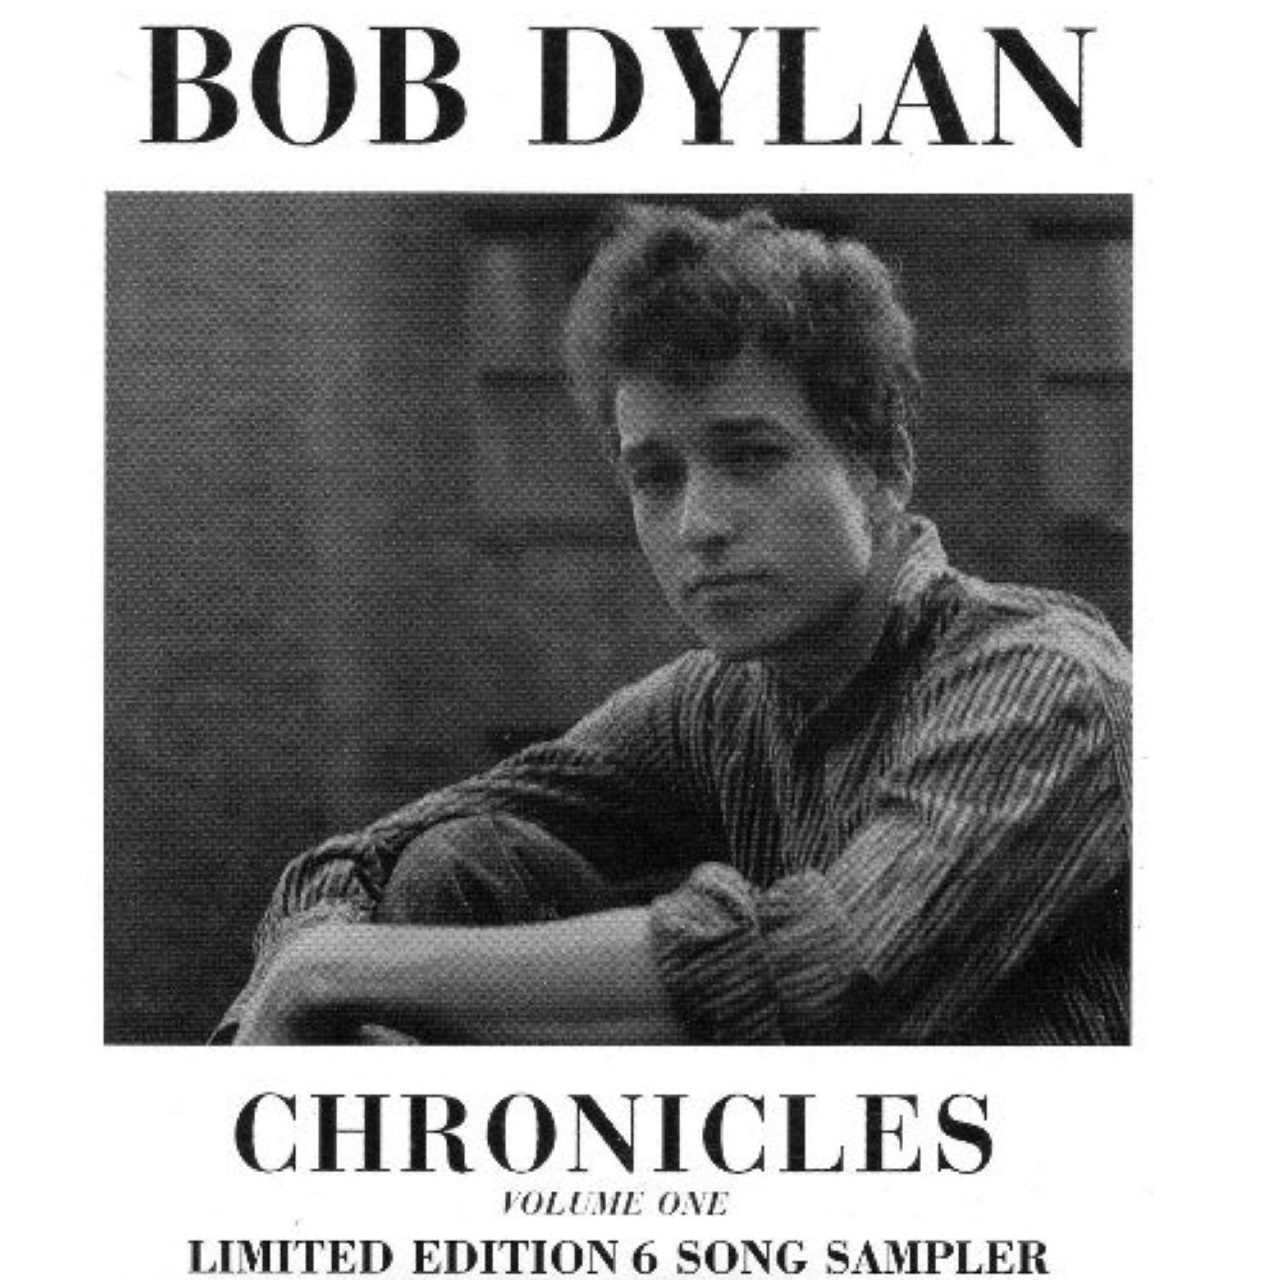 Bob Dylan - Chronicles Vol. One cover book